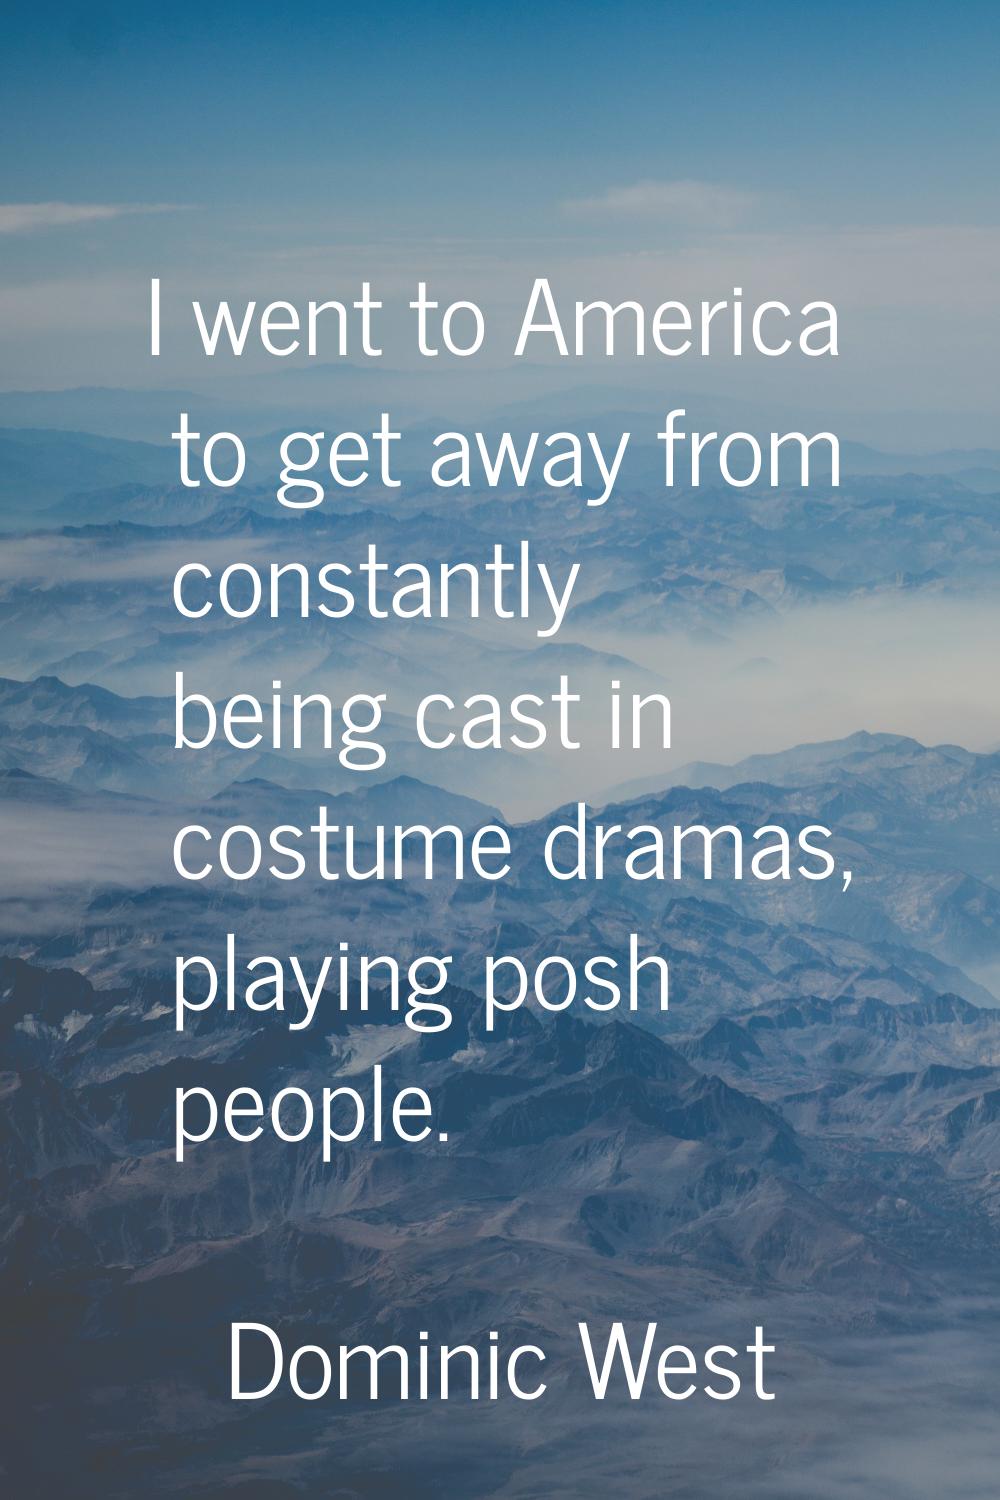 I went to America to get away from constantly being cast in costume dramas, playing posh people.